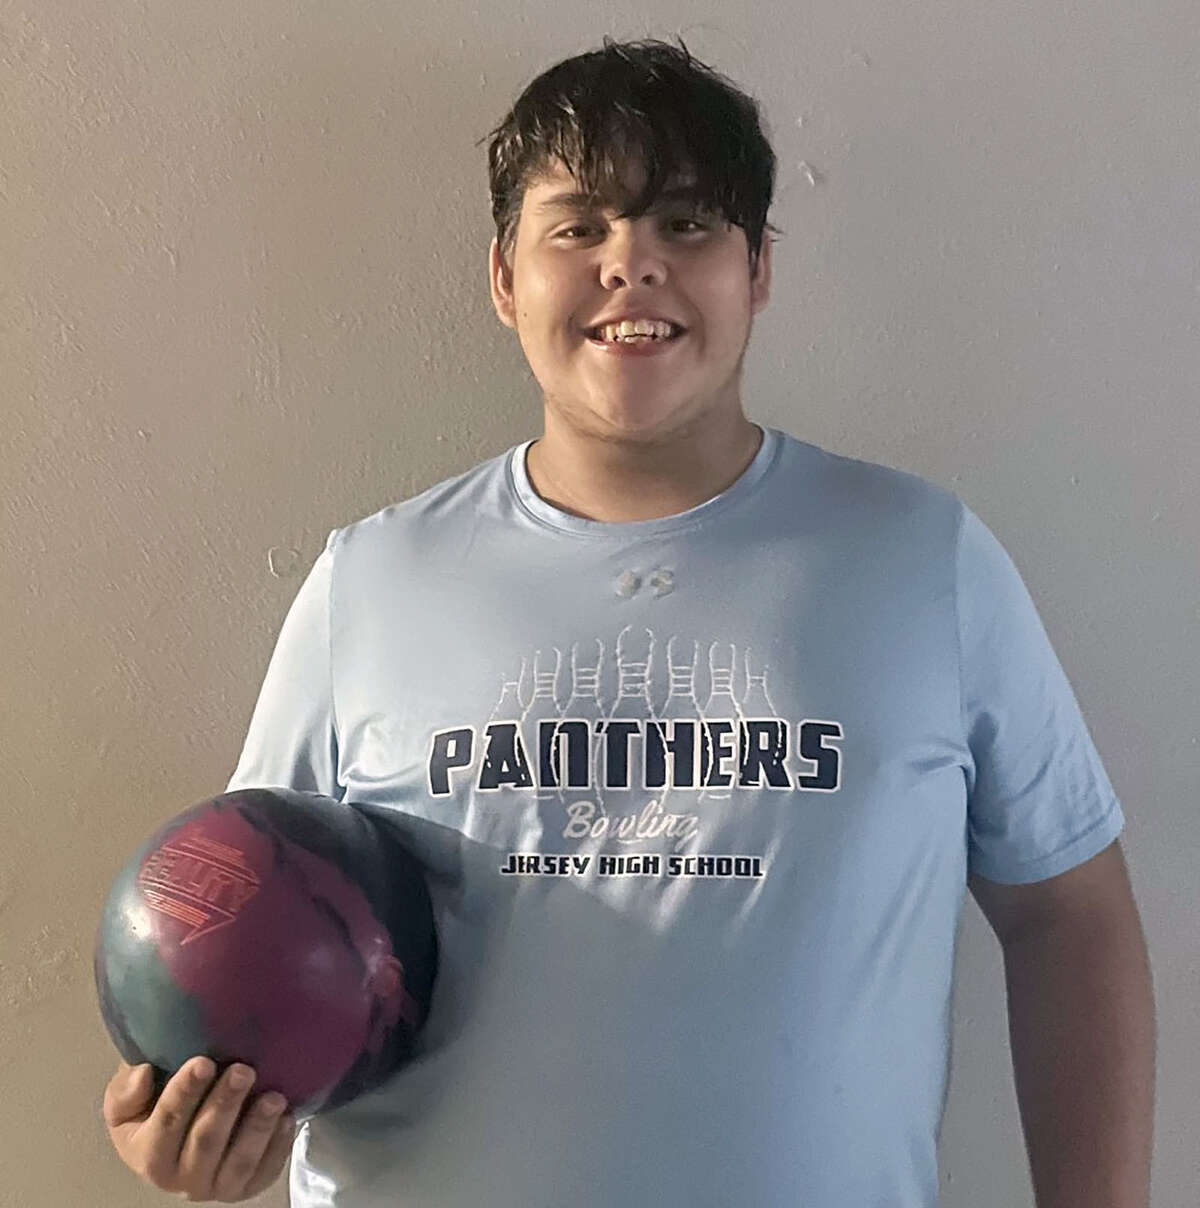 Jersey senior Danny Towell led his team with a total of 1,384 pins at Saturday's Collinsville Sectional Tournament at Camelot Bowl. The Panthers finished third as a team and will advance to next weekend's IHSA Boys State Tournament.